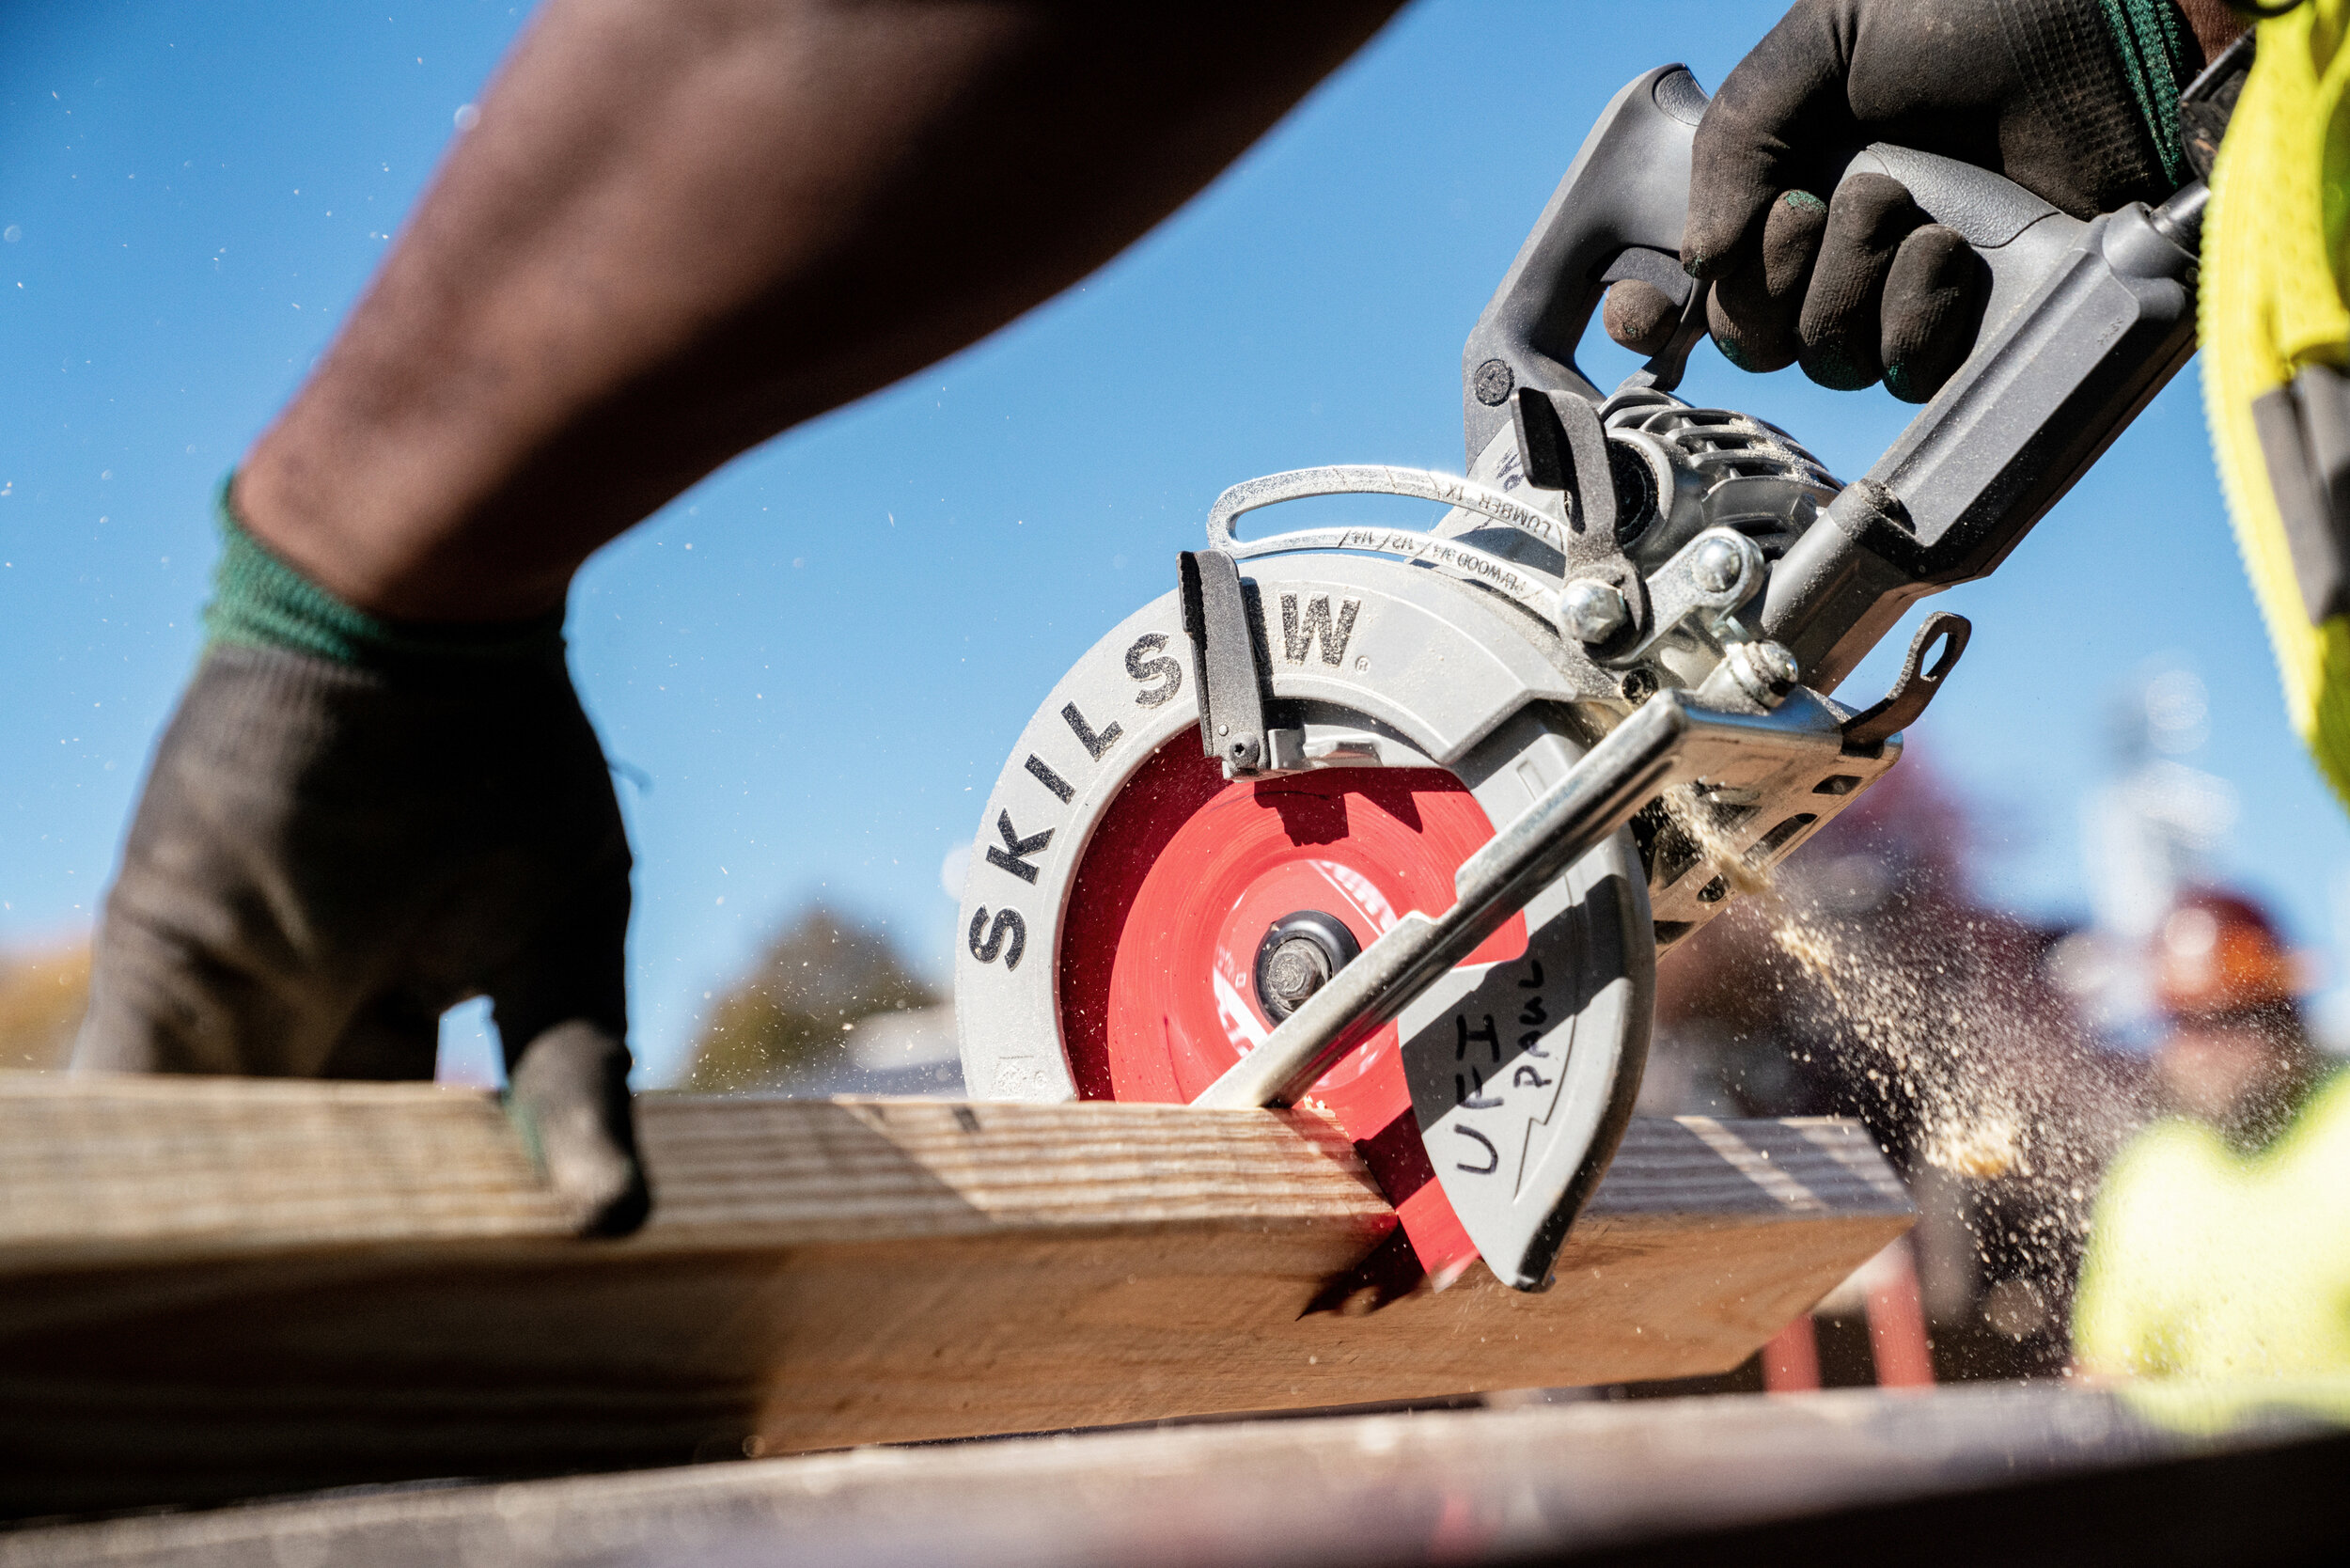 Construction worker cutting wood with a circular saw.